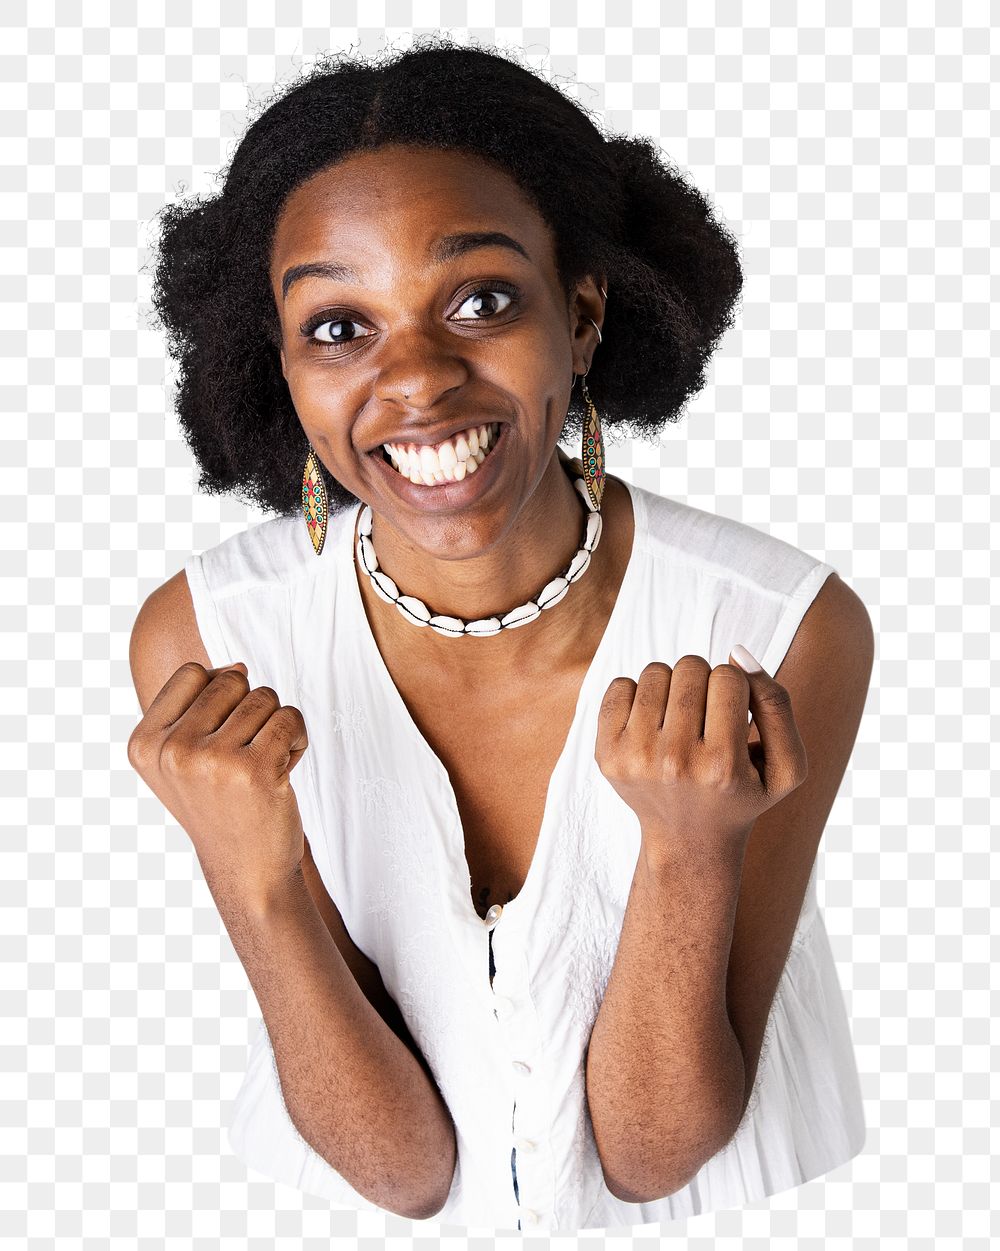 Happy young woman png element, transparent background